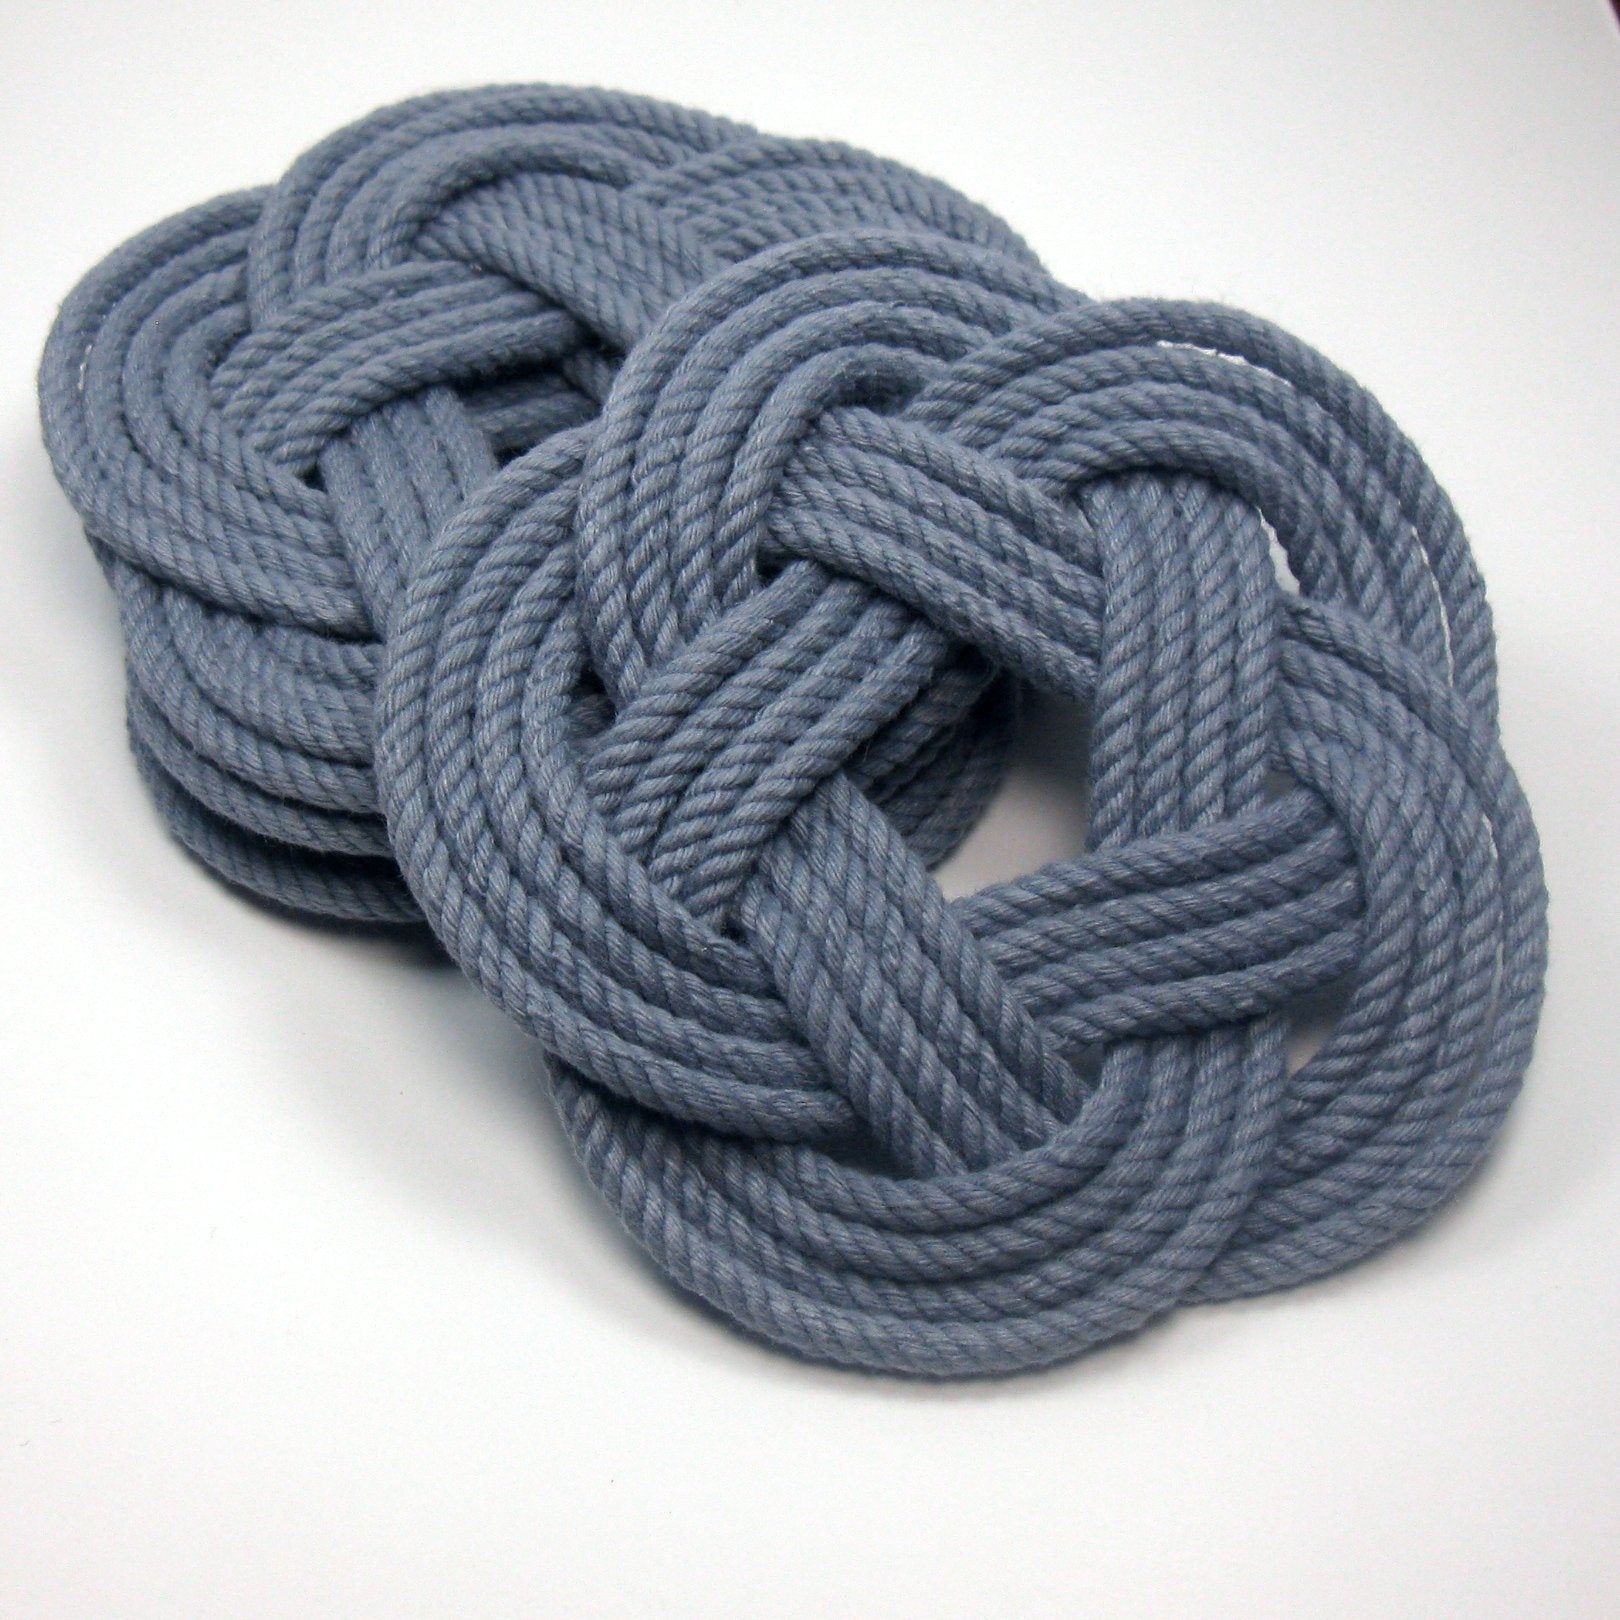 Nautical Knot Sailor Knot Coasters, Woven in Grey , Set of 4 handmade at Mystic Knotwork